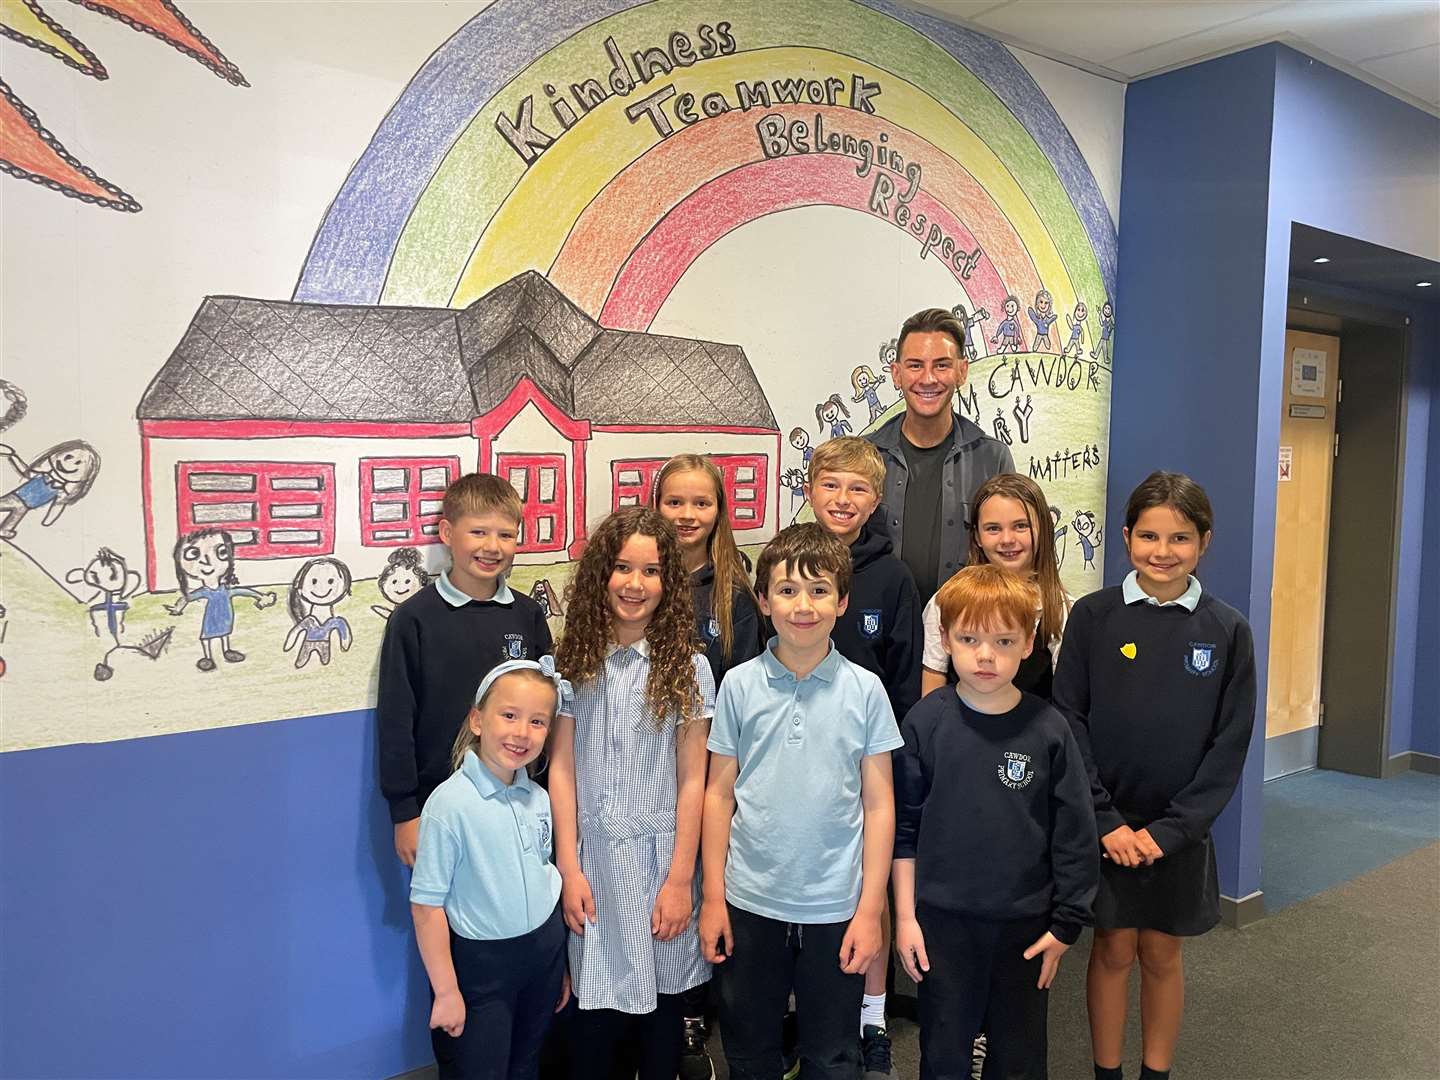 Head teacher James Cook with a group of students at Cawdor Primary.